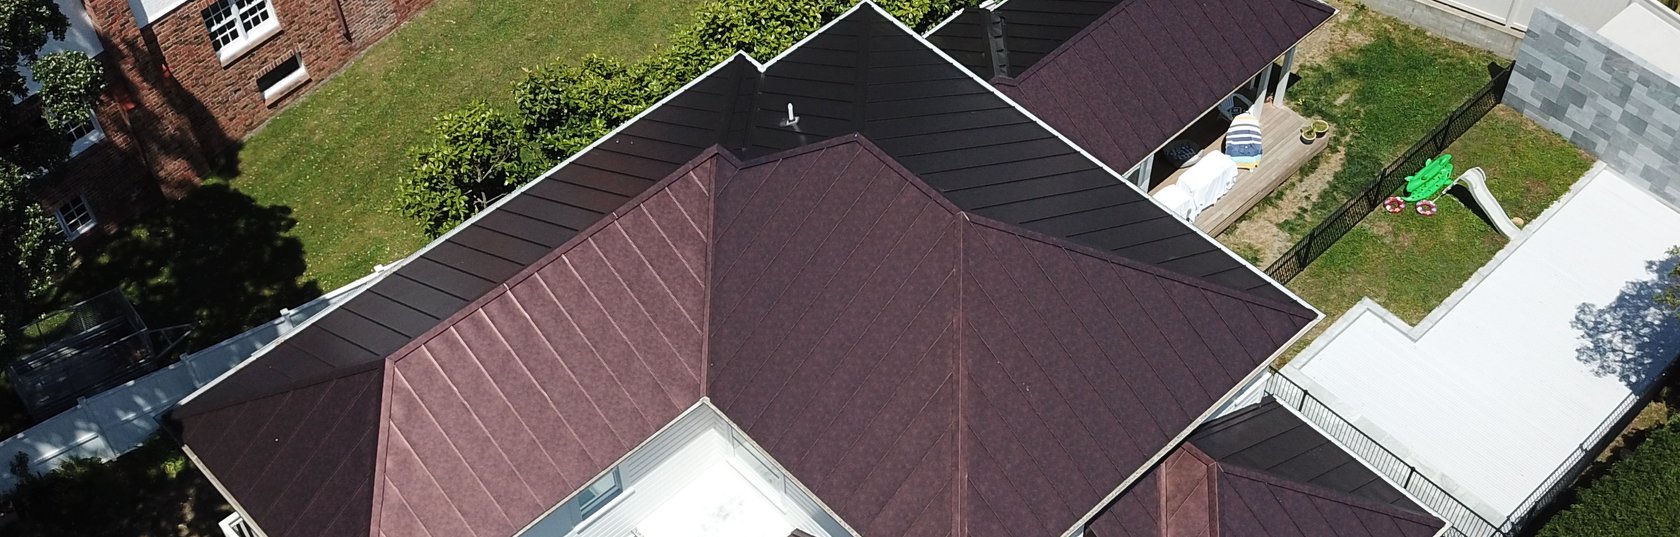 We've got you covered: Which roofing material is best for your needs?